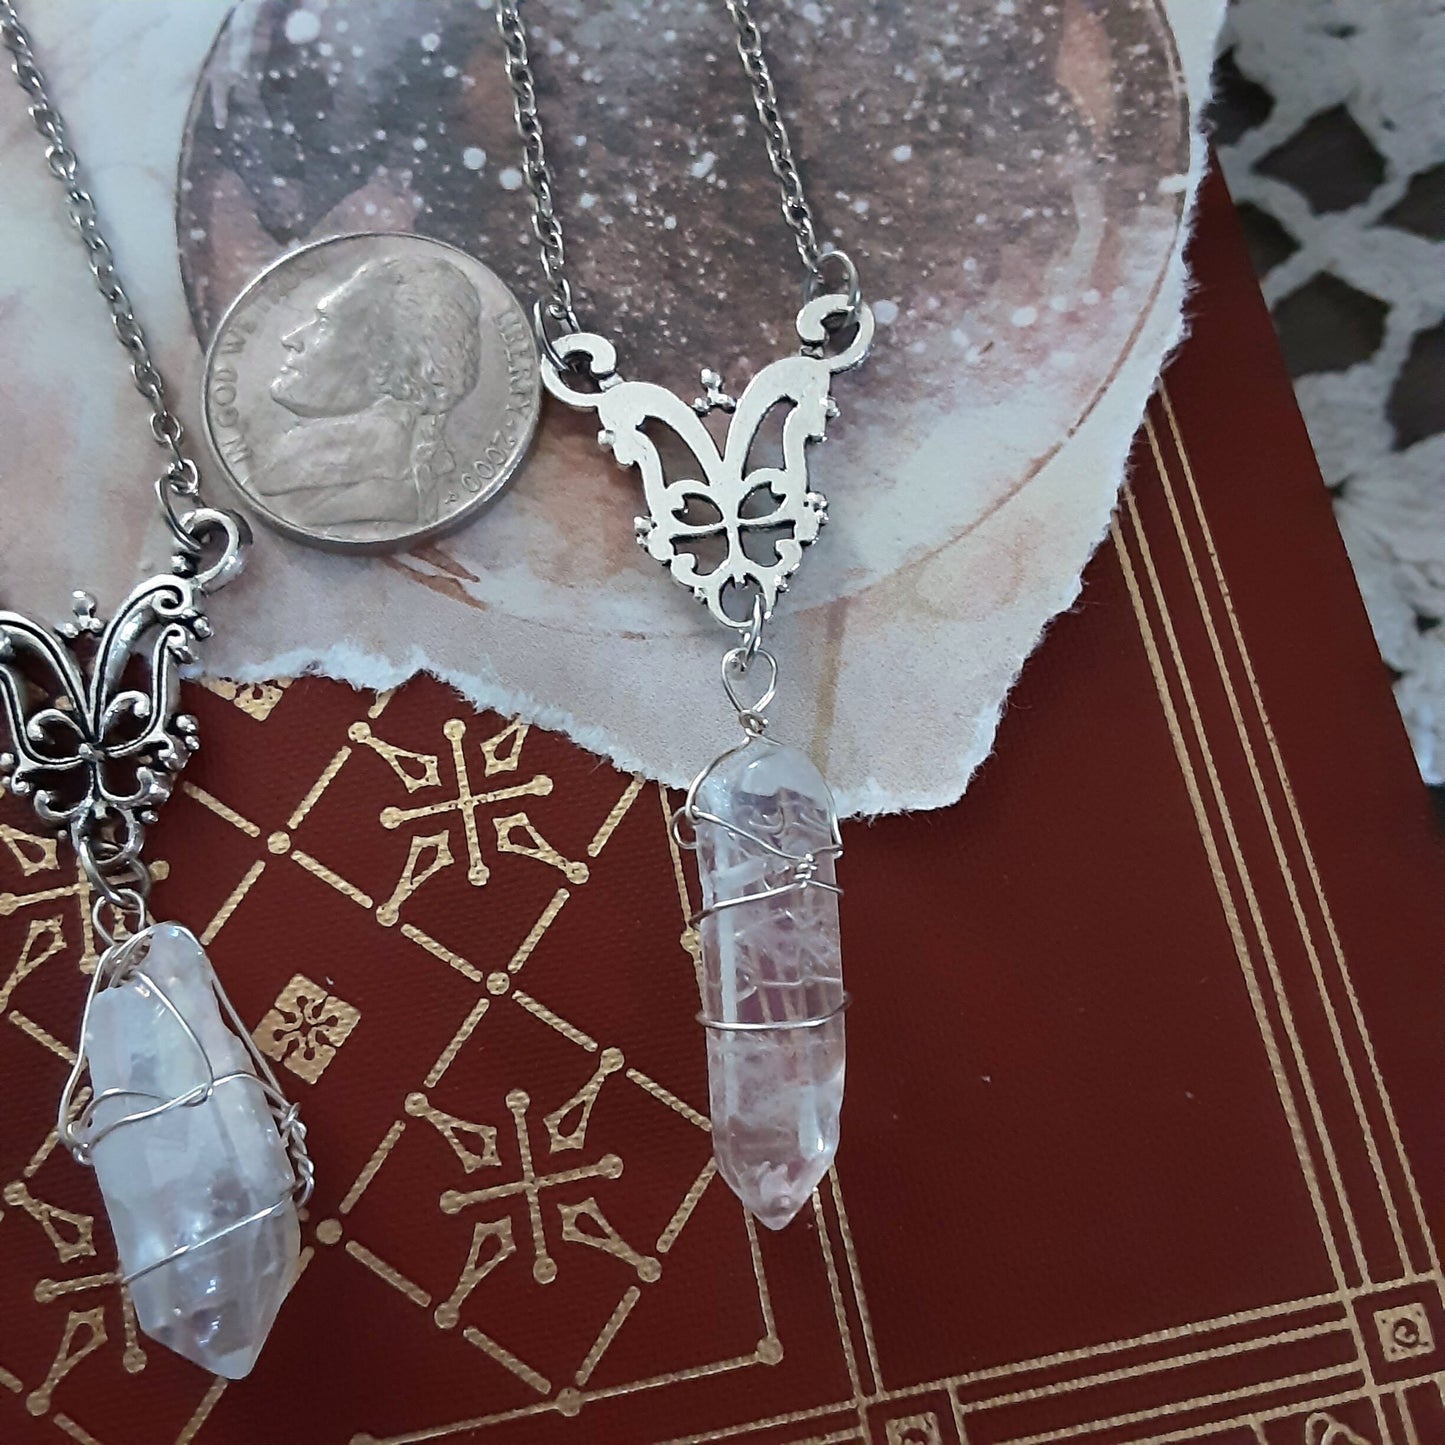 Crystal Quartz Necklace, Fairy core Jewelry, Good Vibes Crystal, Ethereal, Dainty Gem Necklace, Gift idea